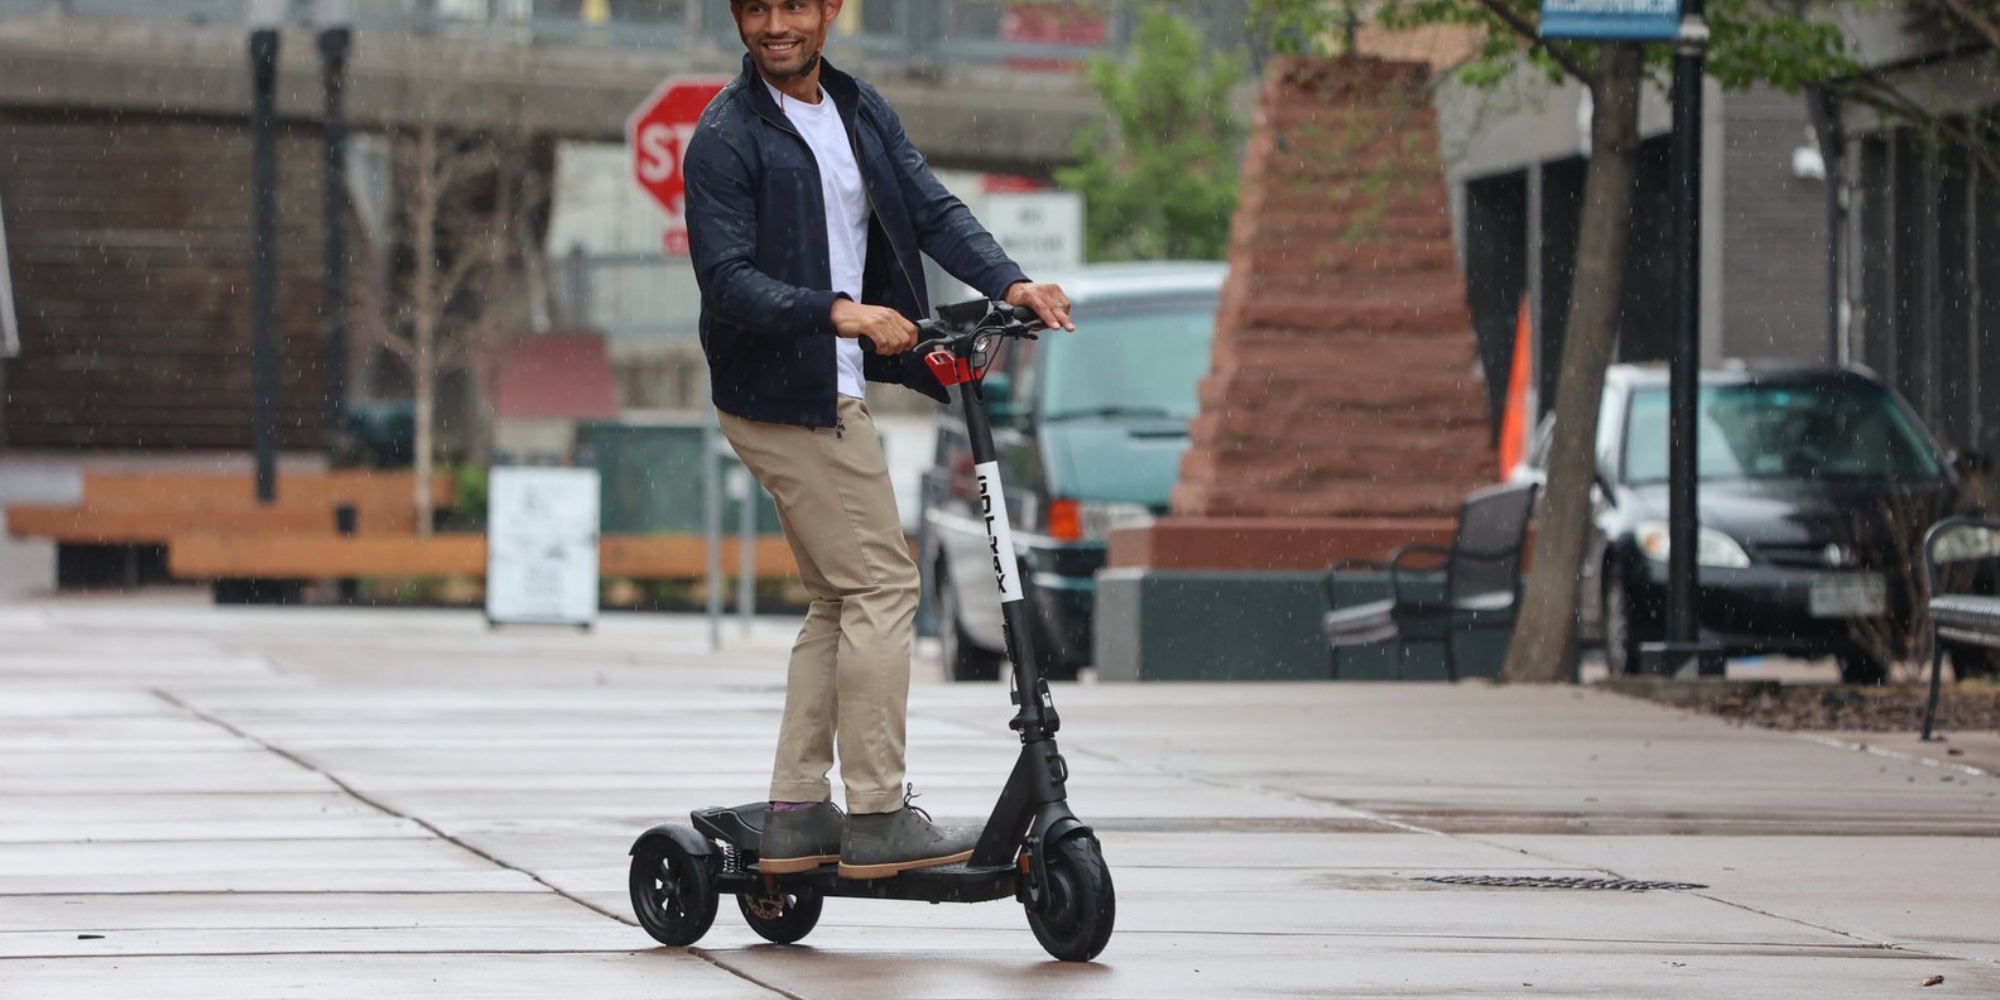 Gotrax G Pro electric scooter on sale for Cyber Monday | Electrek